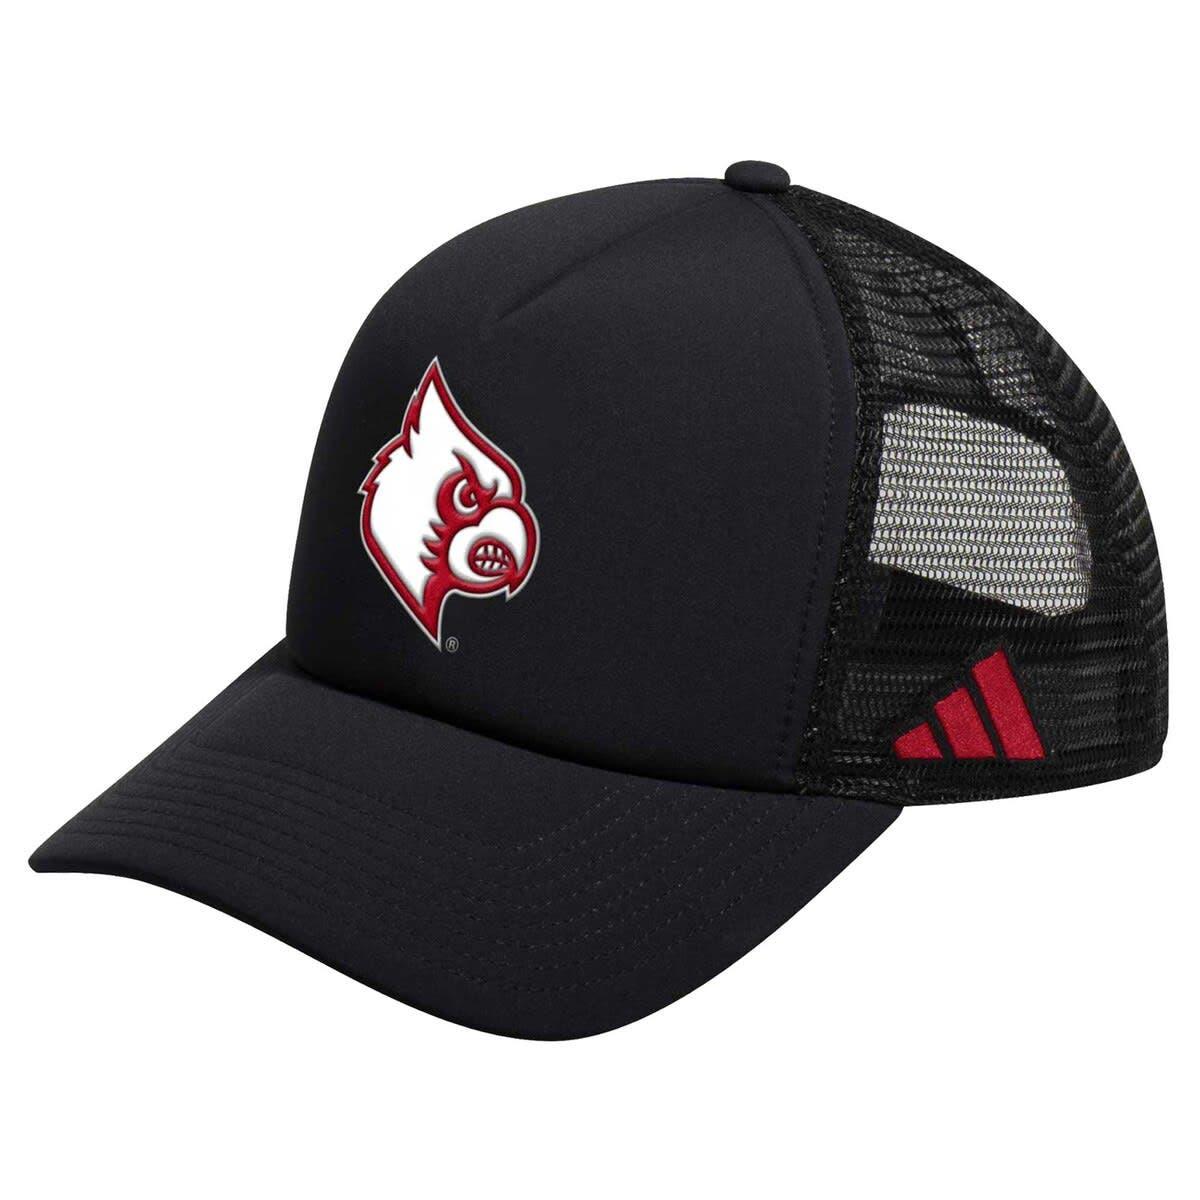 adidas Men's Louisville Cardinals Cardinal Red Fitted Performance Hat